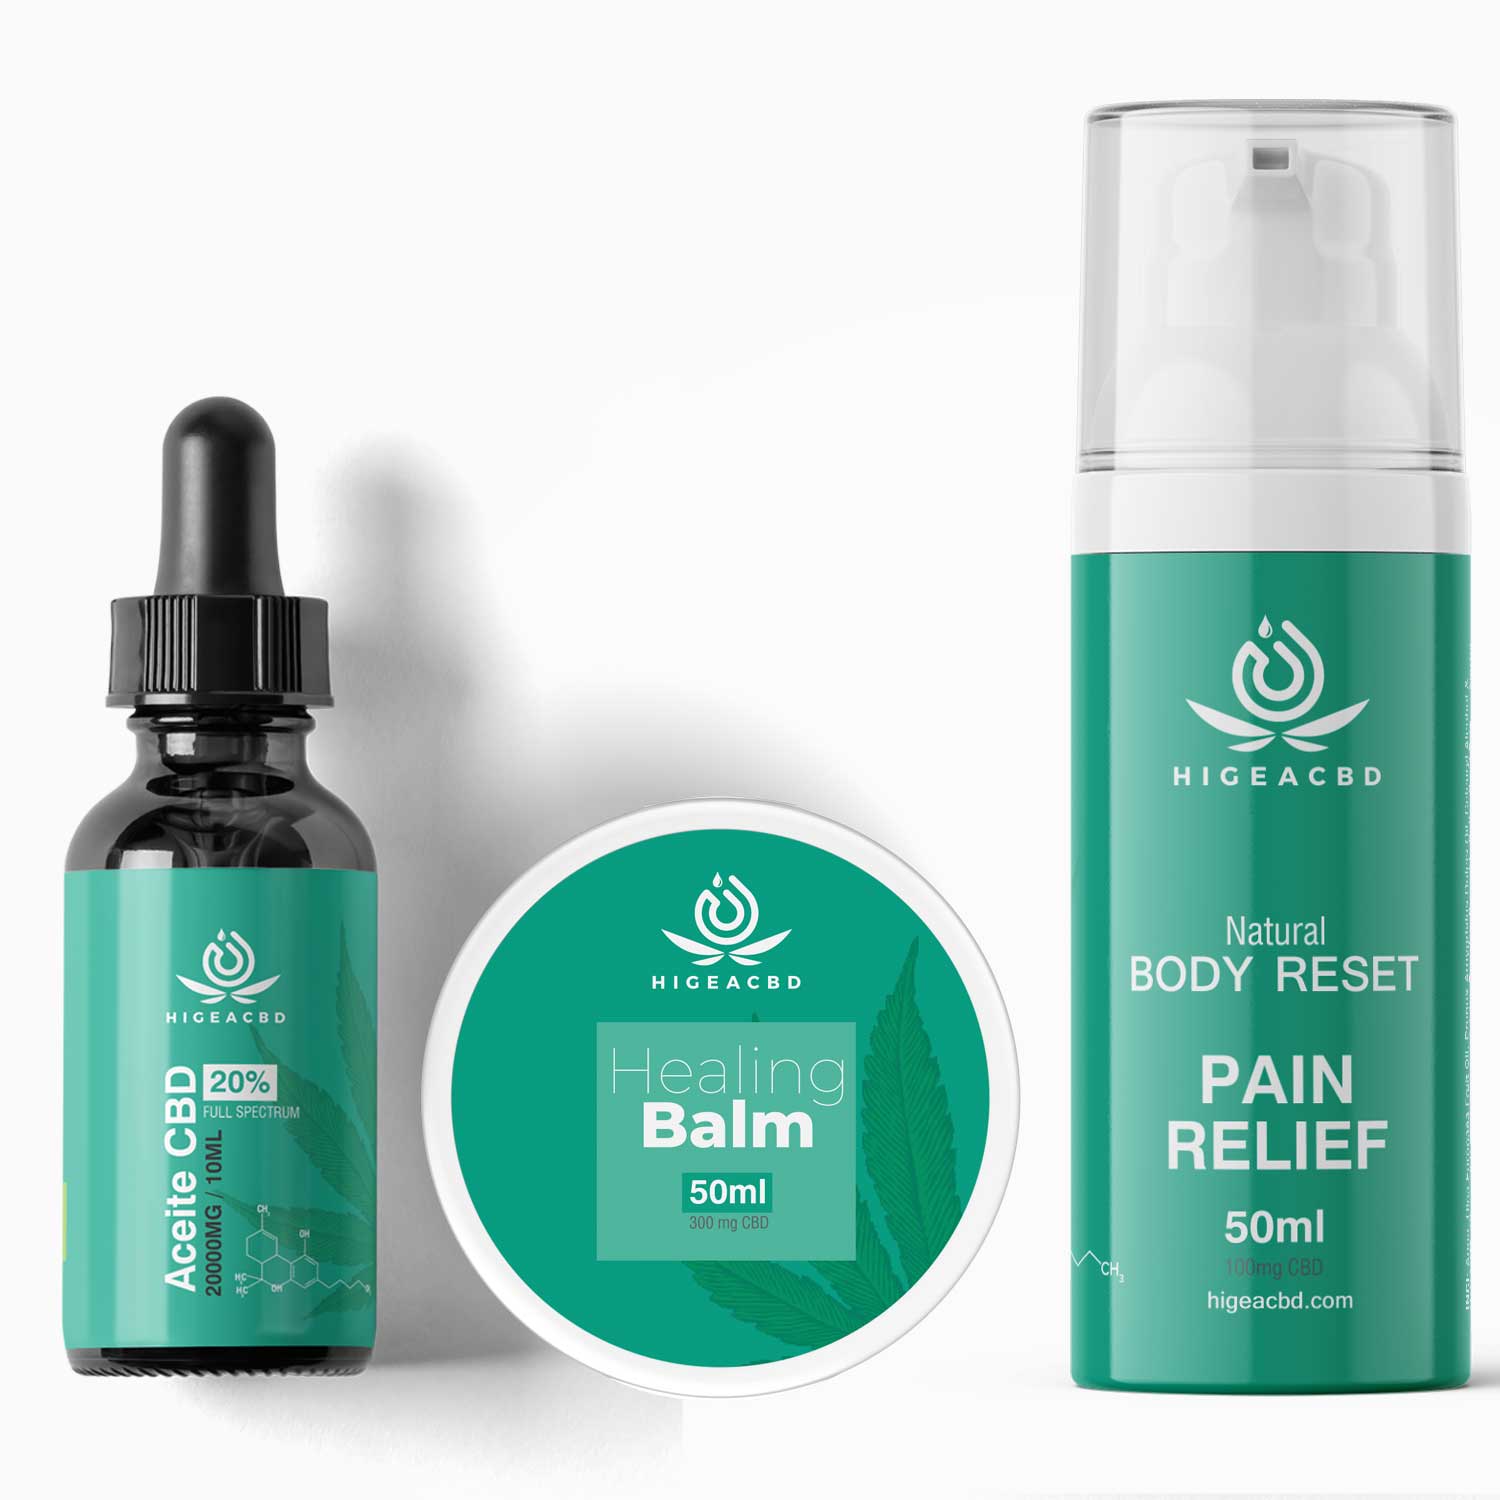 pack of CBD creams and oils for yayos